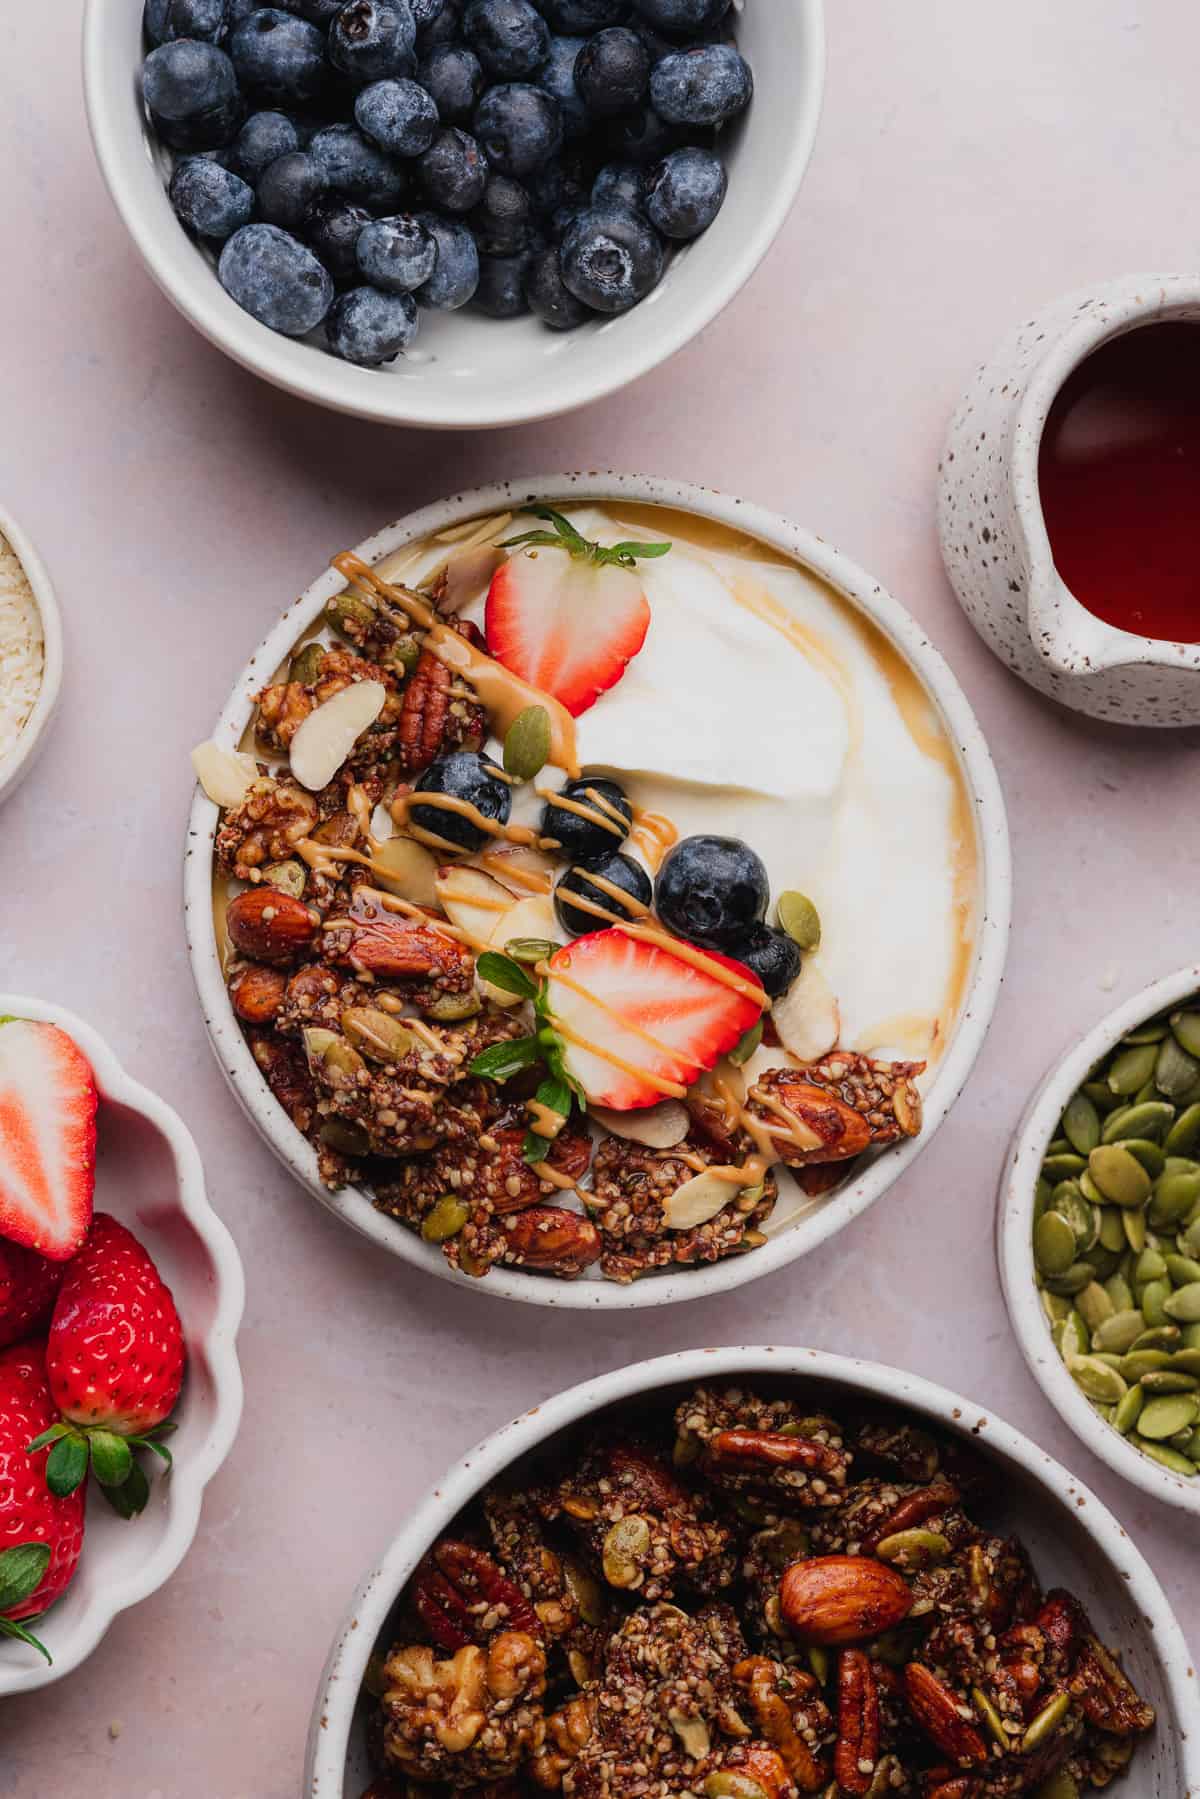 beautiful yogurt with granola and fruit bowl with melted chocolate, peanut butter, and maple syrup.